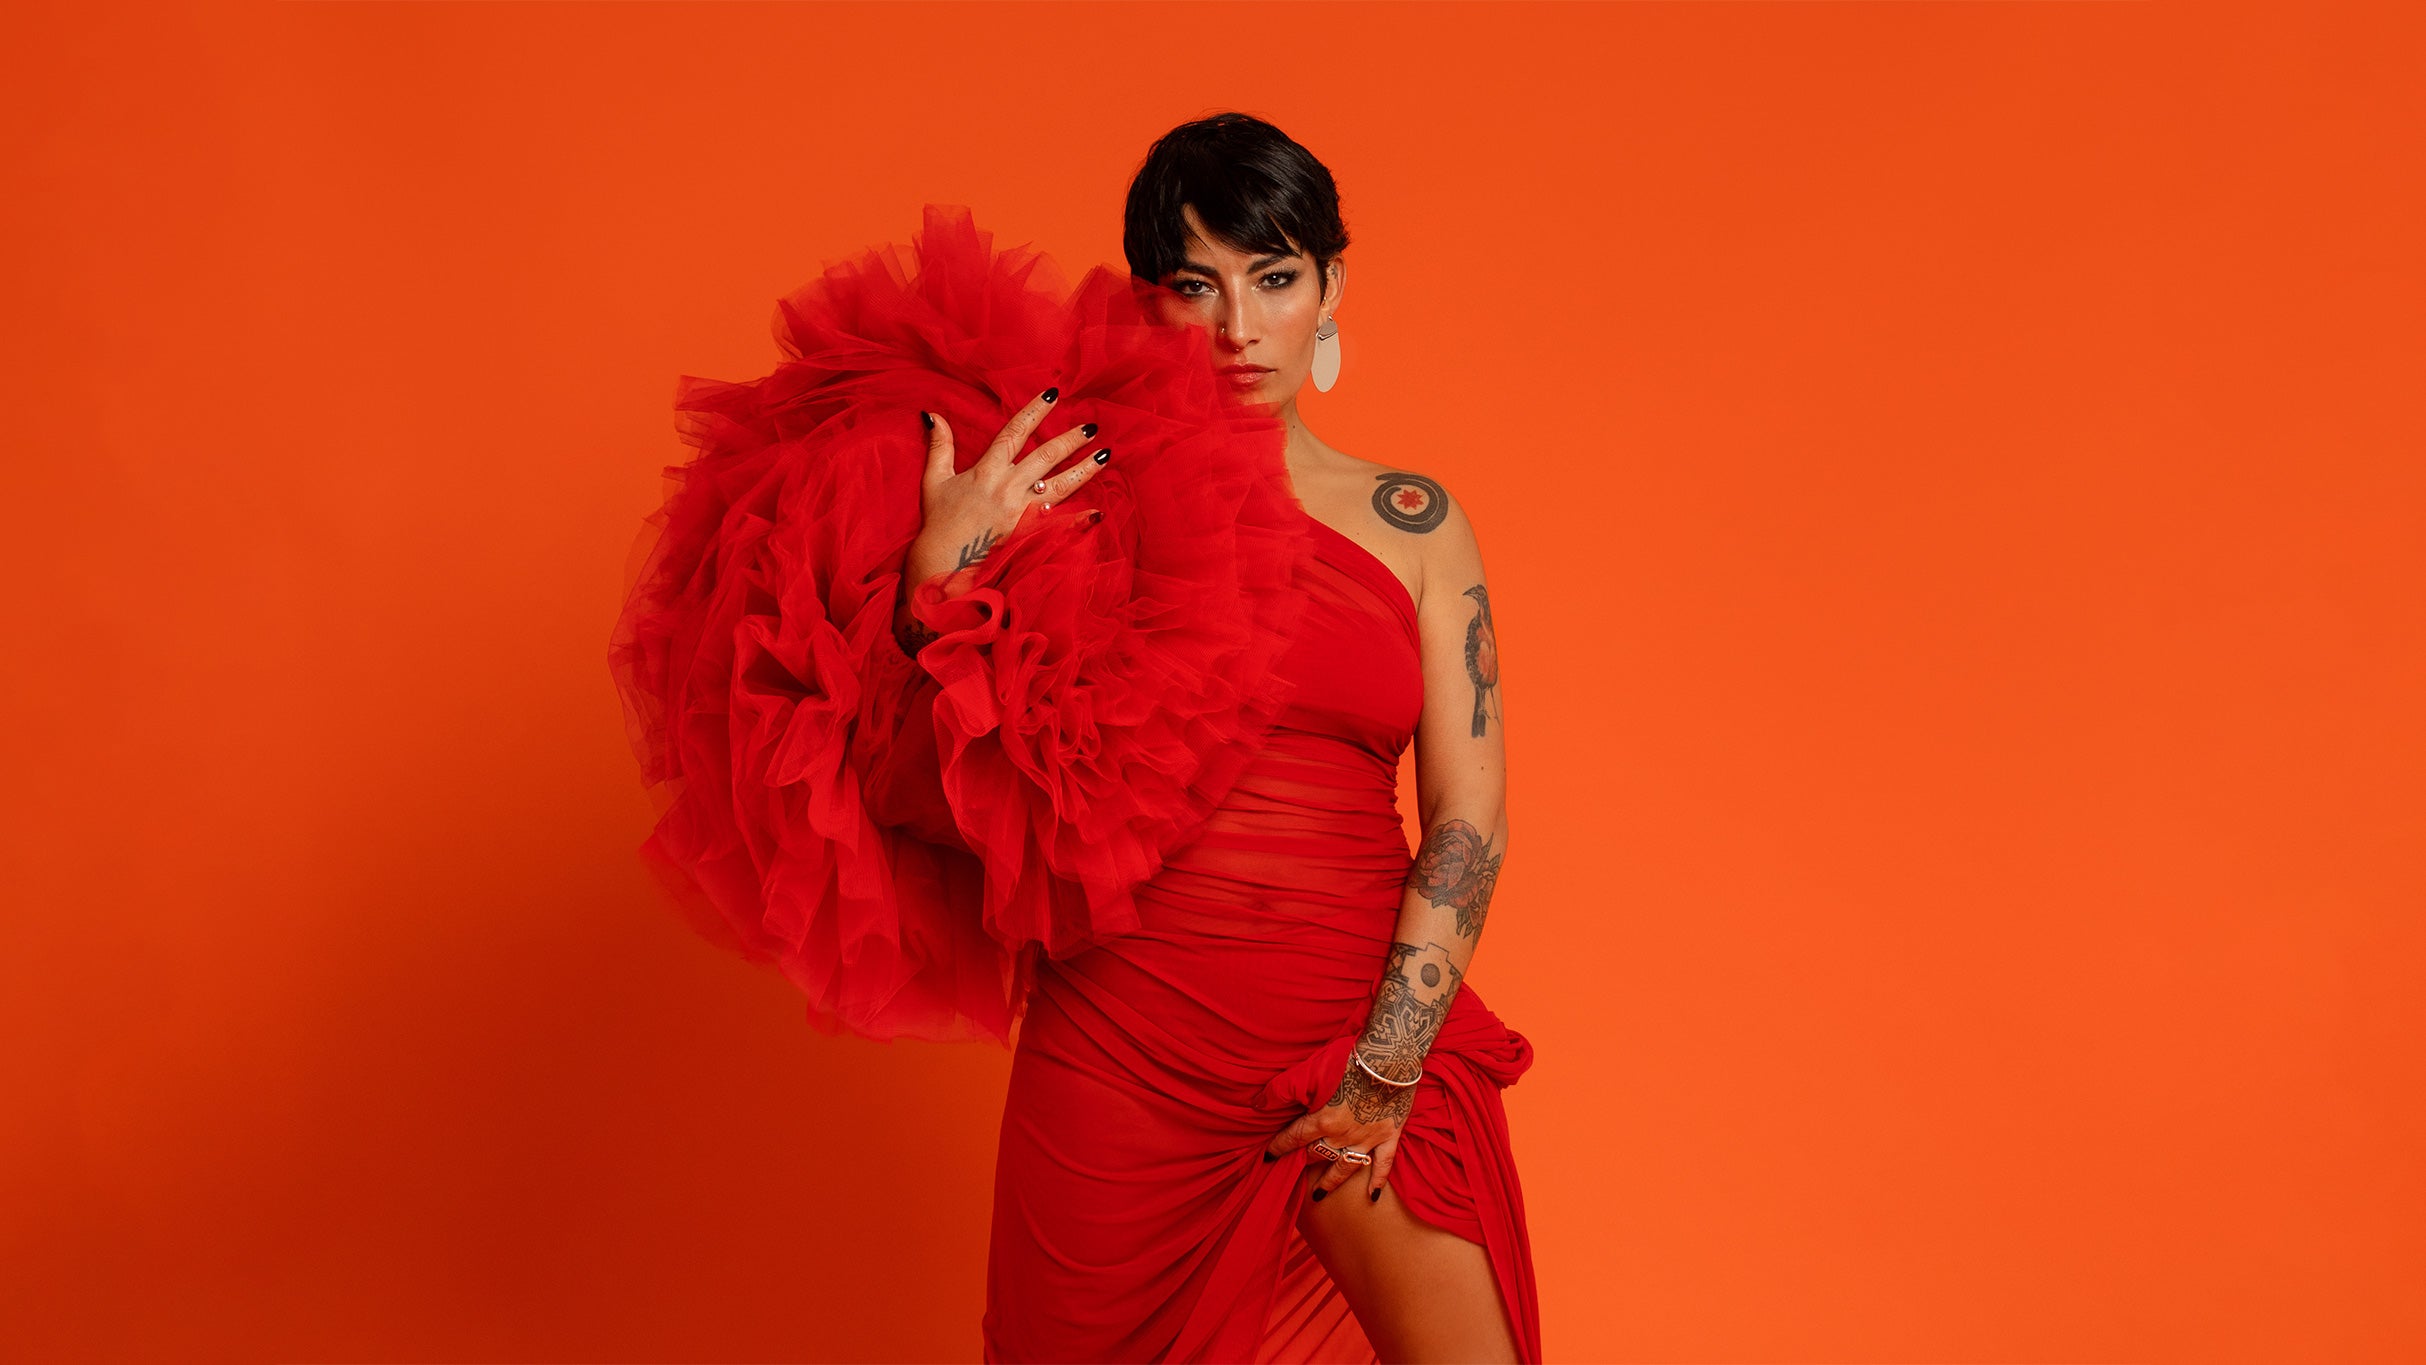 members only presale password for Ana Tijoux tickets in Los Angeles at The Regent Theater